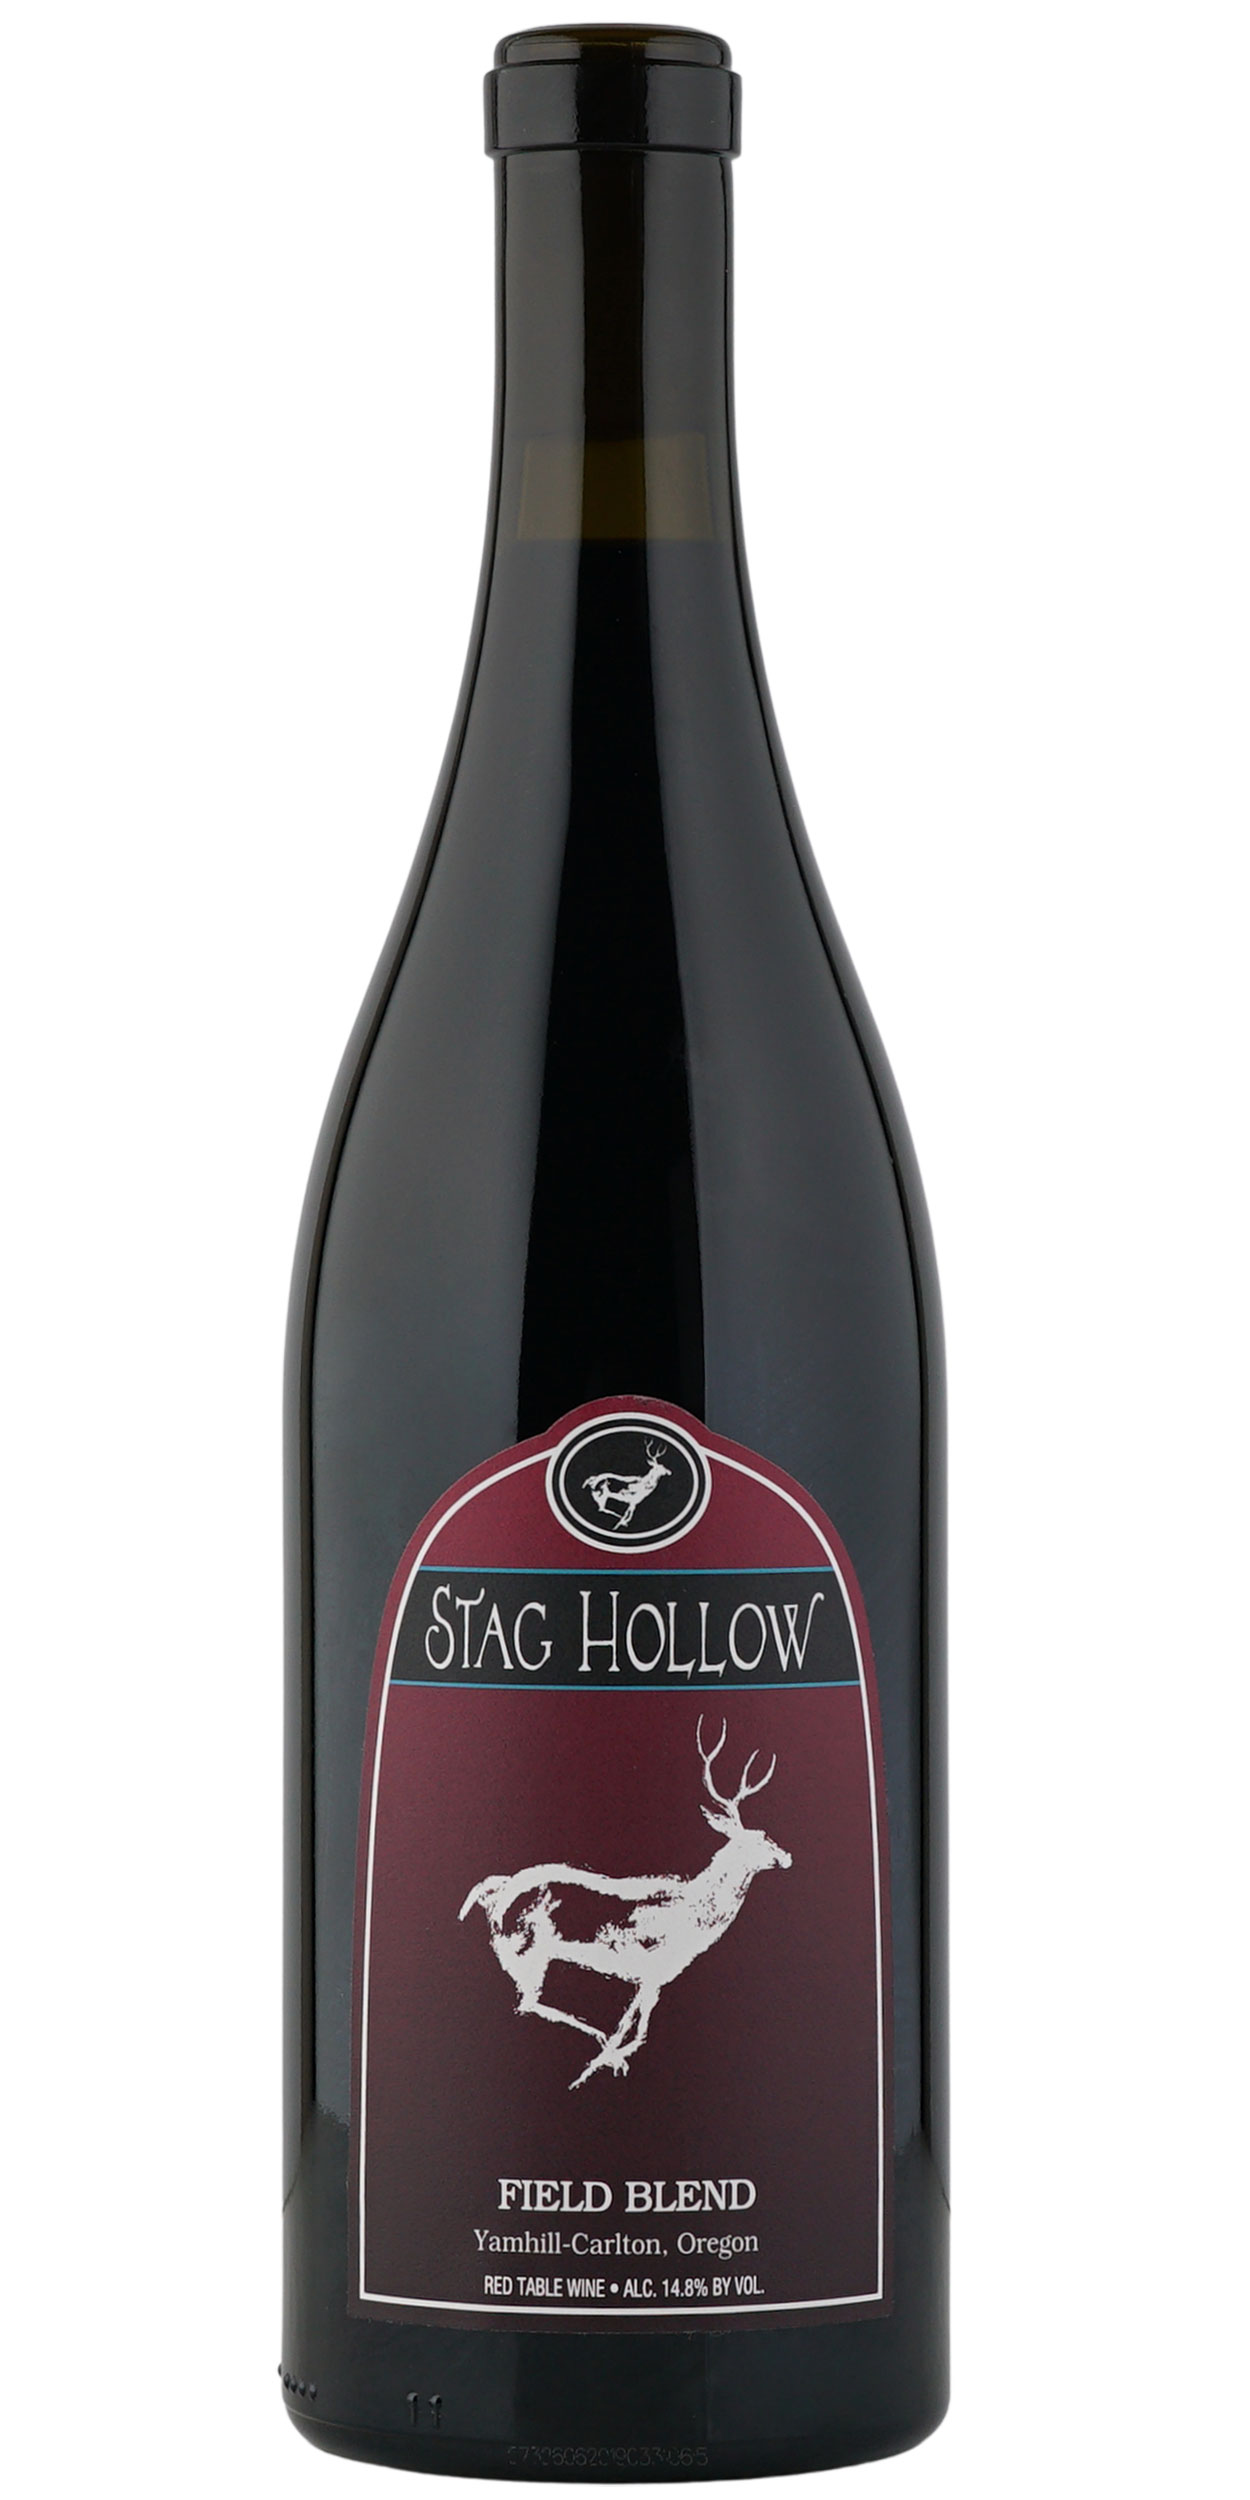 Bottle of Stag Hollow Field Blend